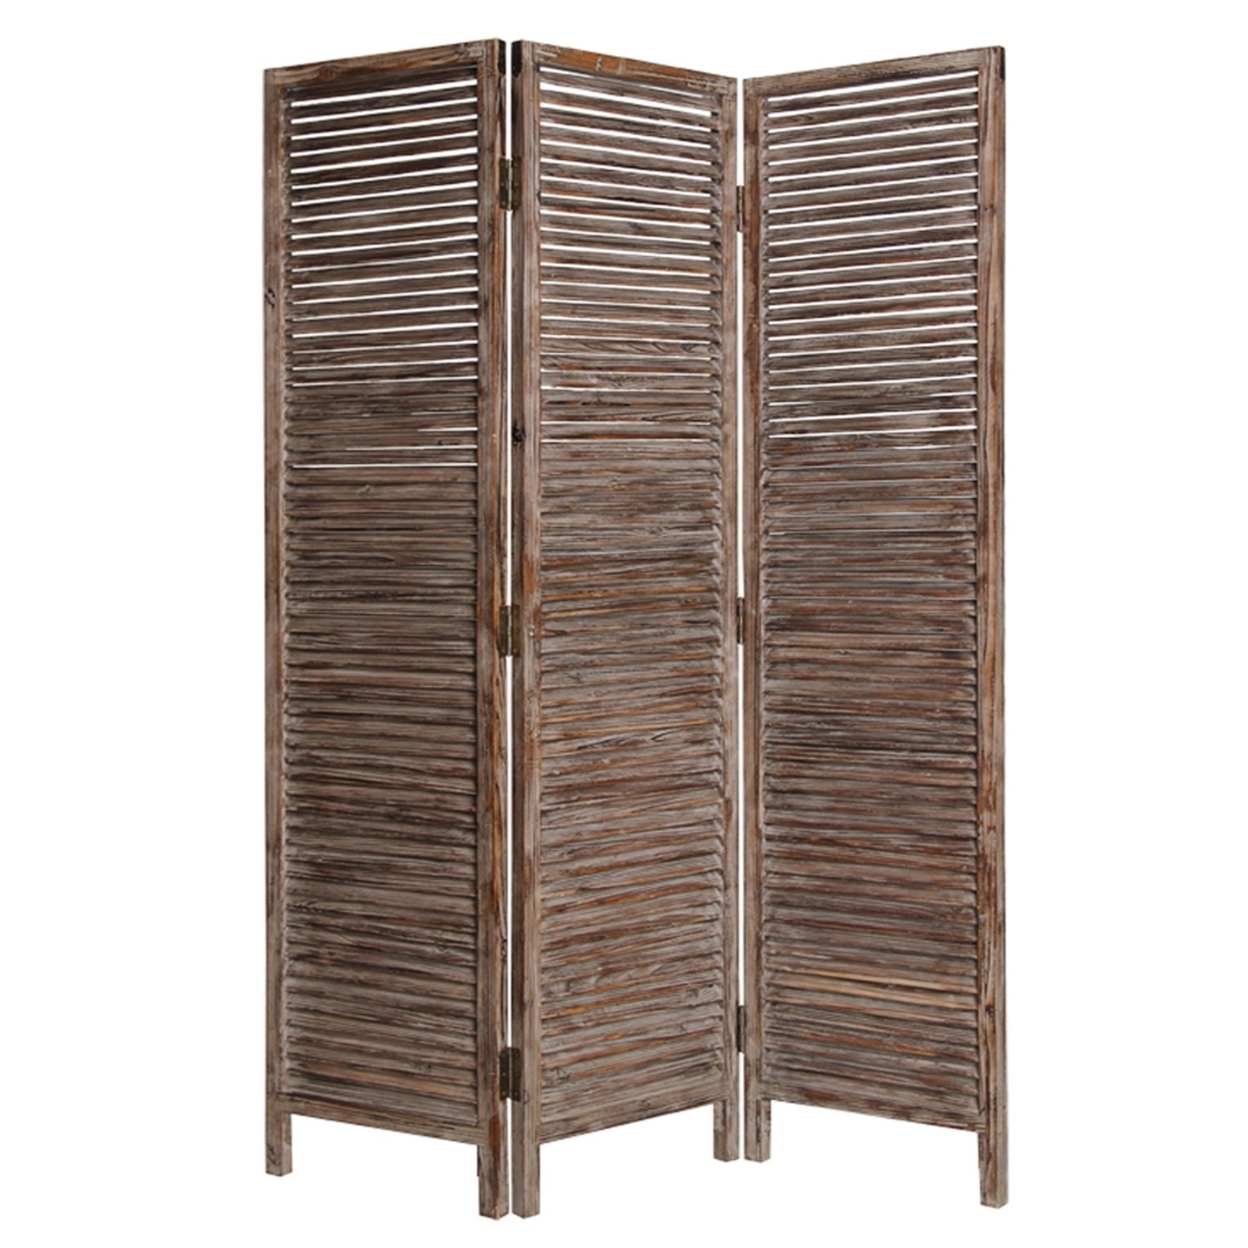 3 Panel 72 Inch Shutter Screen, Wood Slatted Panels, Distressed Brown Finish